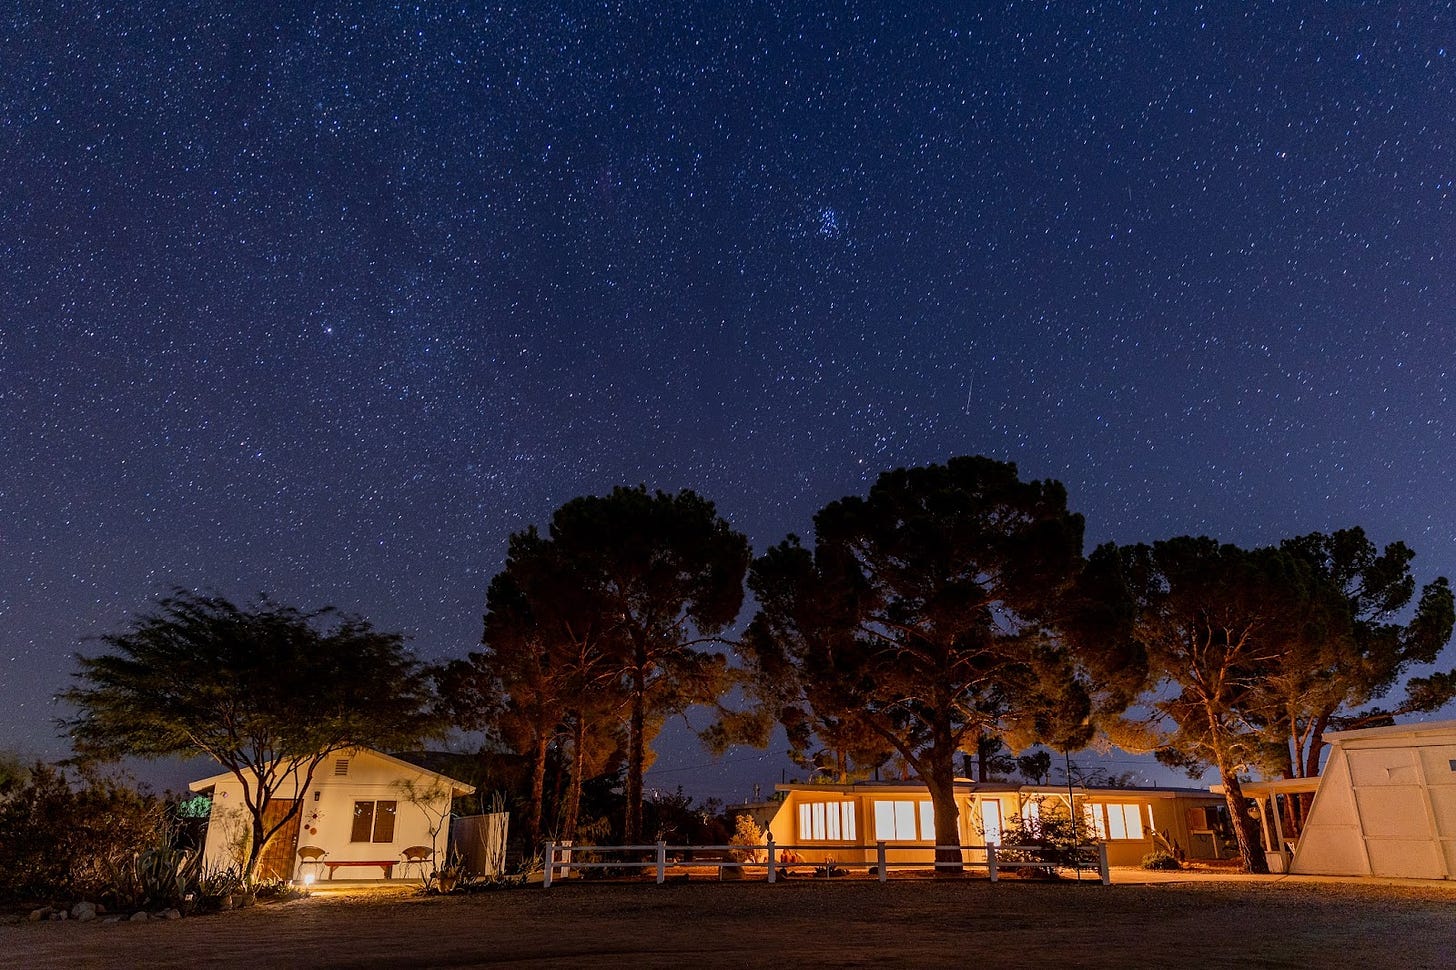 Starry nighttime shot of front exterior view of Jackrabbit Studios, including its Casita on the left, main house in the center, and edge of the studio workshop on the right, with a crown of midnight-blue sky dotted with billions of white stars.